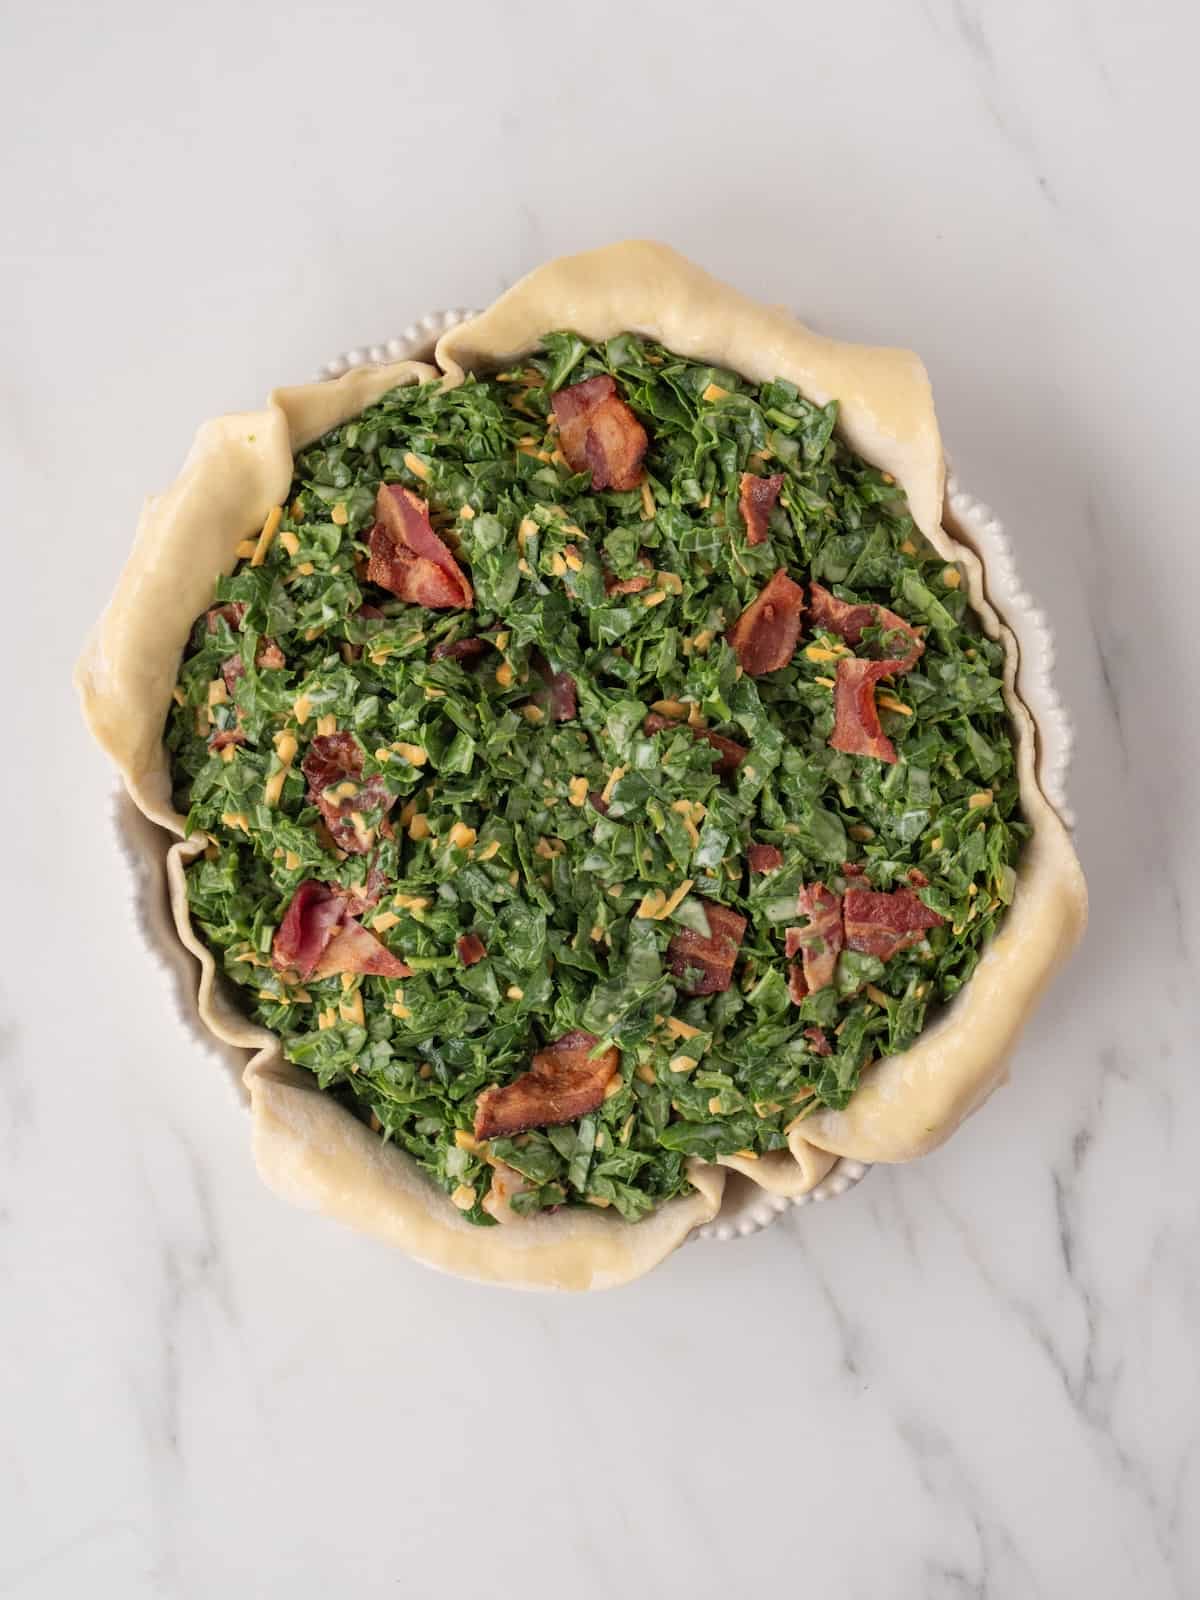 A 9 inch pie dish with rolled out puff pastry, filled with a mixture of eggs, milk, spinach, bacon and cheese, ready to be baked in the oven.